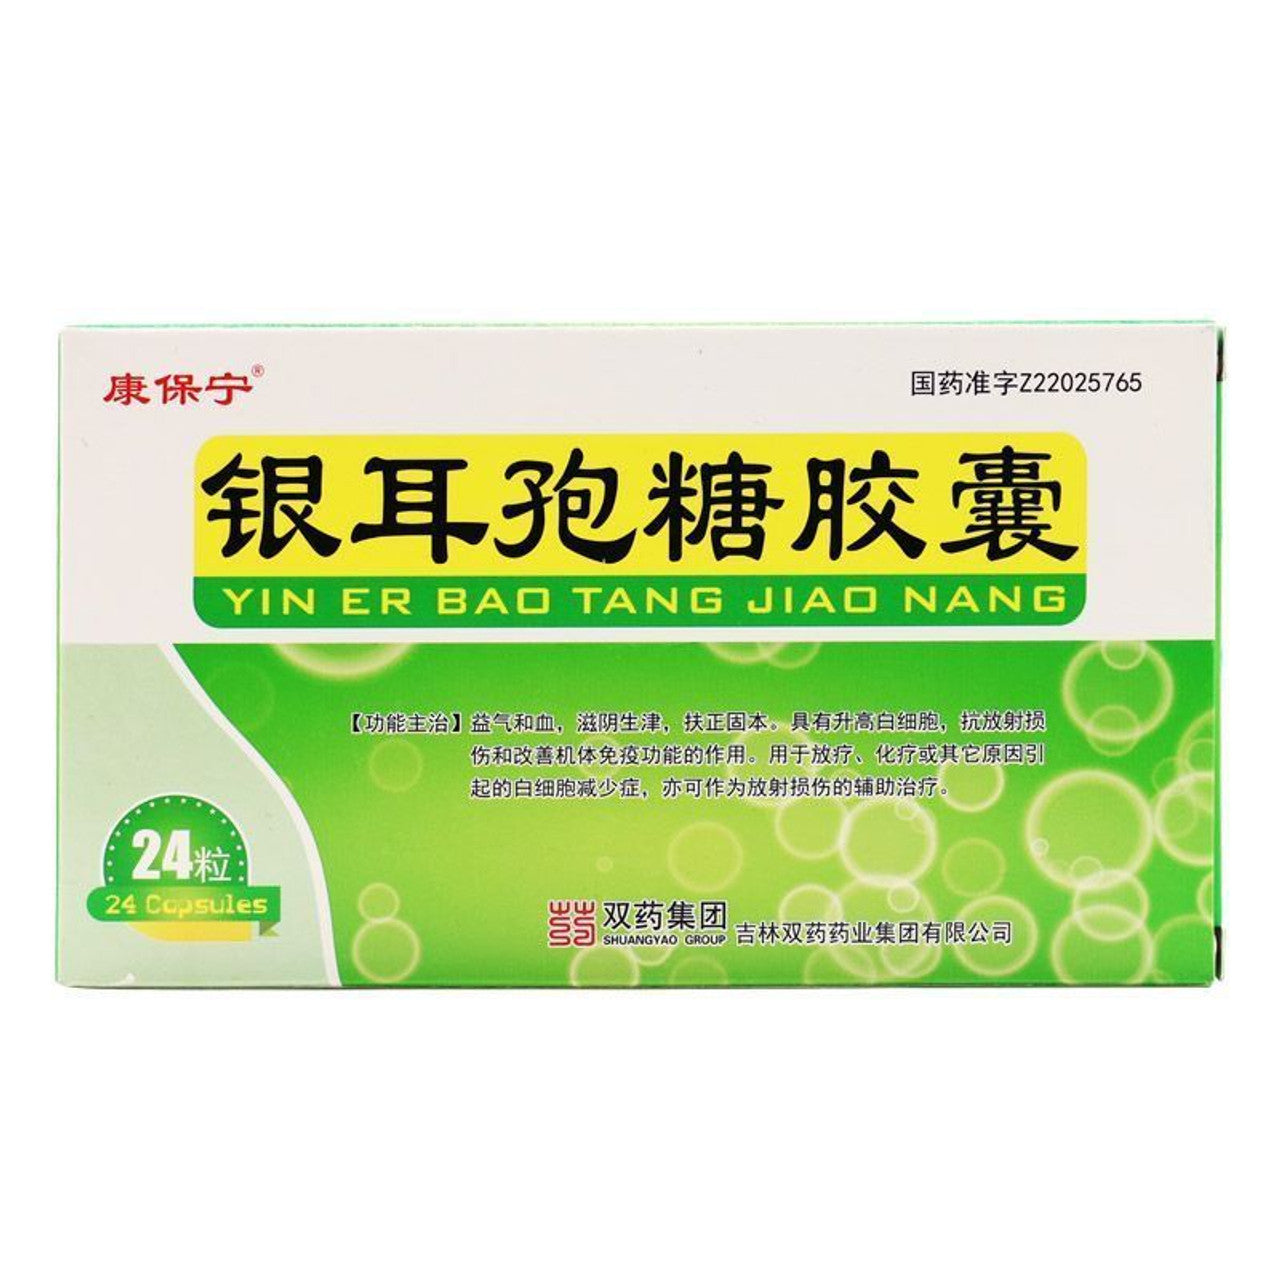 Herbal Medicine. Brand SHUANG YAO. Yin'er Baotang Jiaonang or Yin'er Baotang Capsules or YIN ER BAO TANG JIAO NANG For Boost White blood cells And Platelets